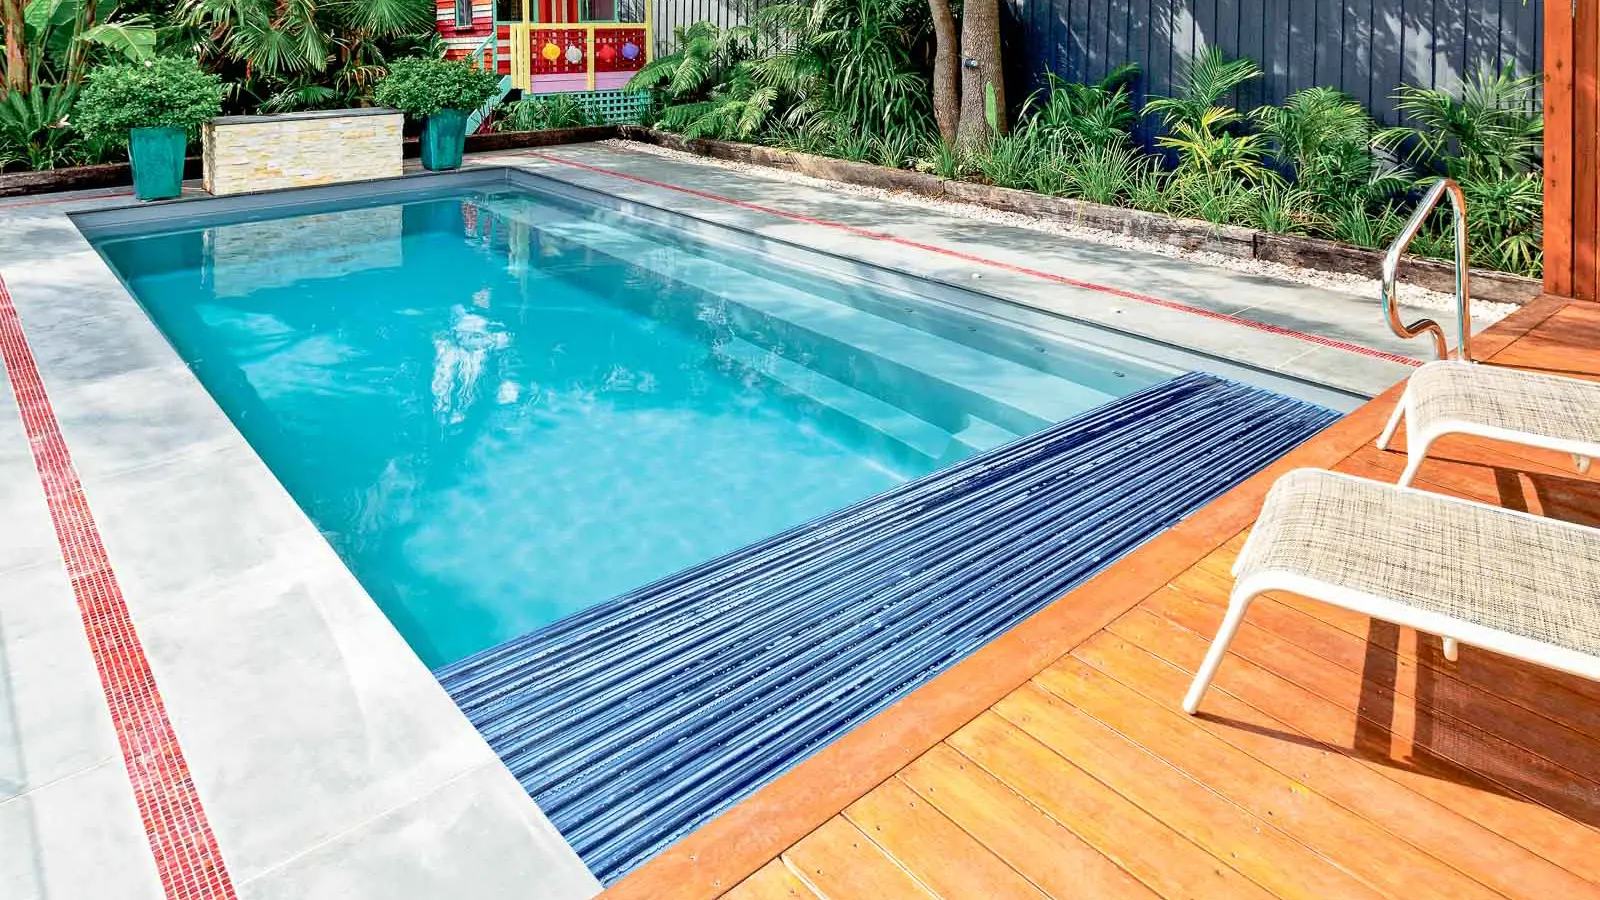 The Reflection plus Cover Box, a fiberglass pool with full-length bench seating and built-in cover box